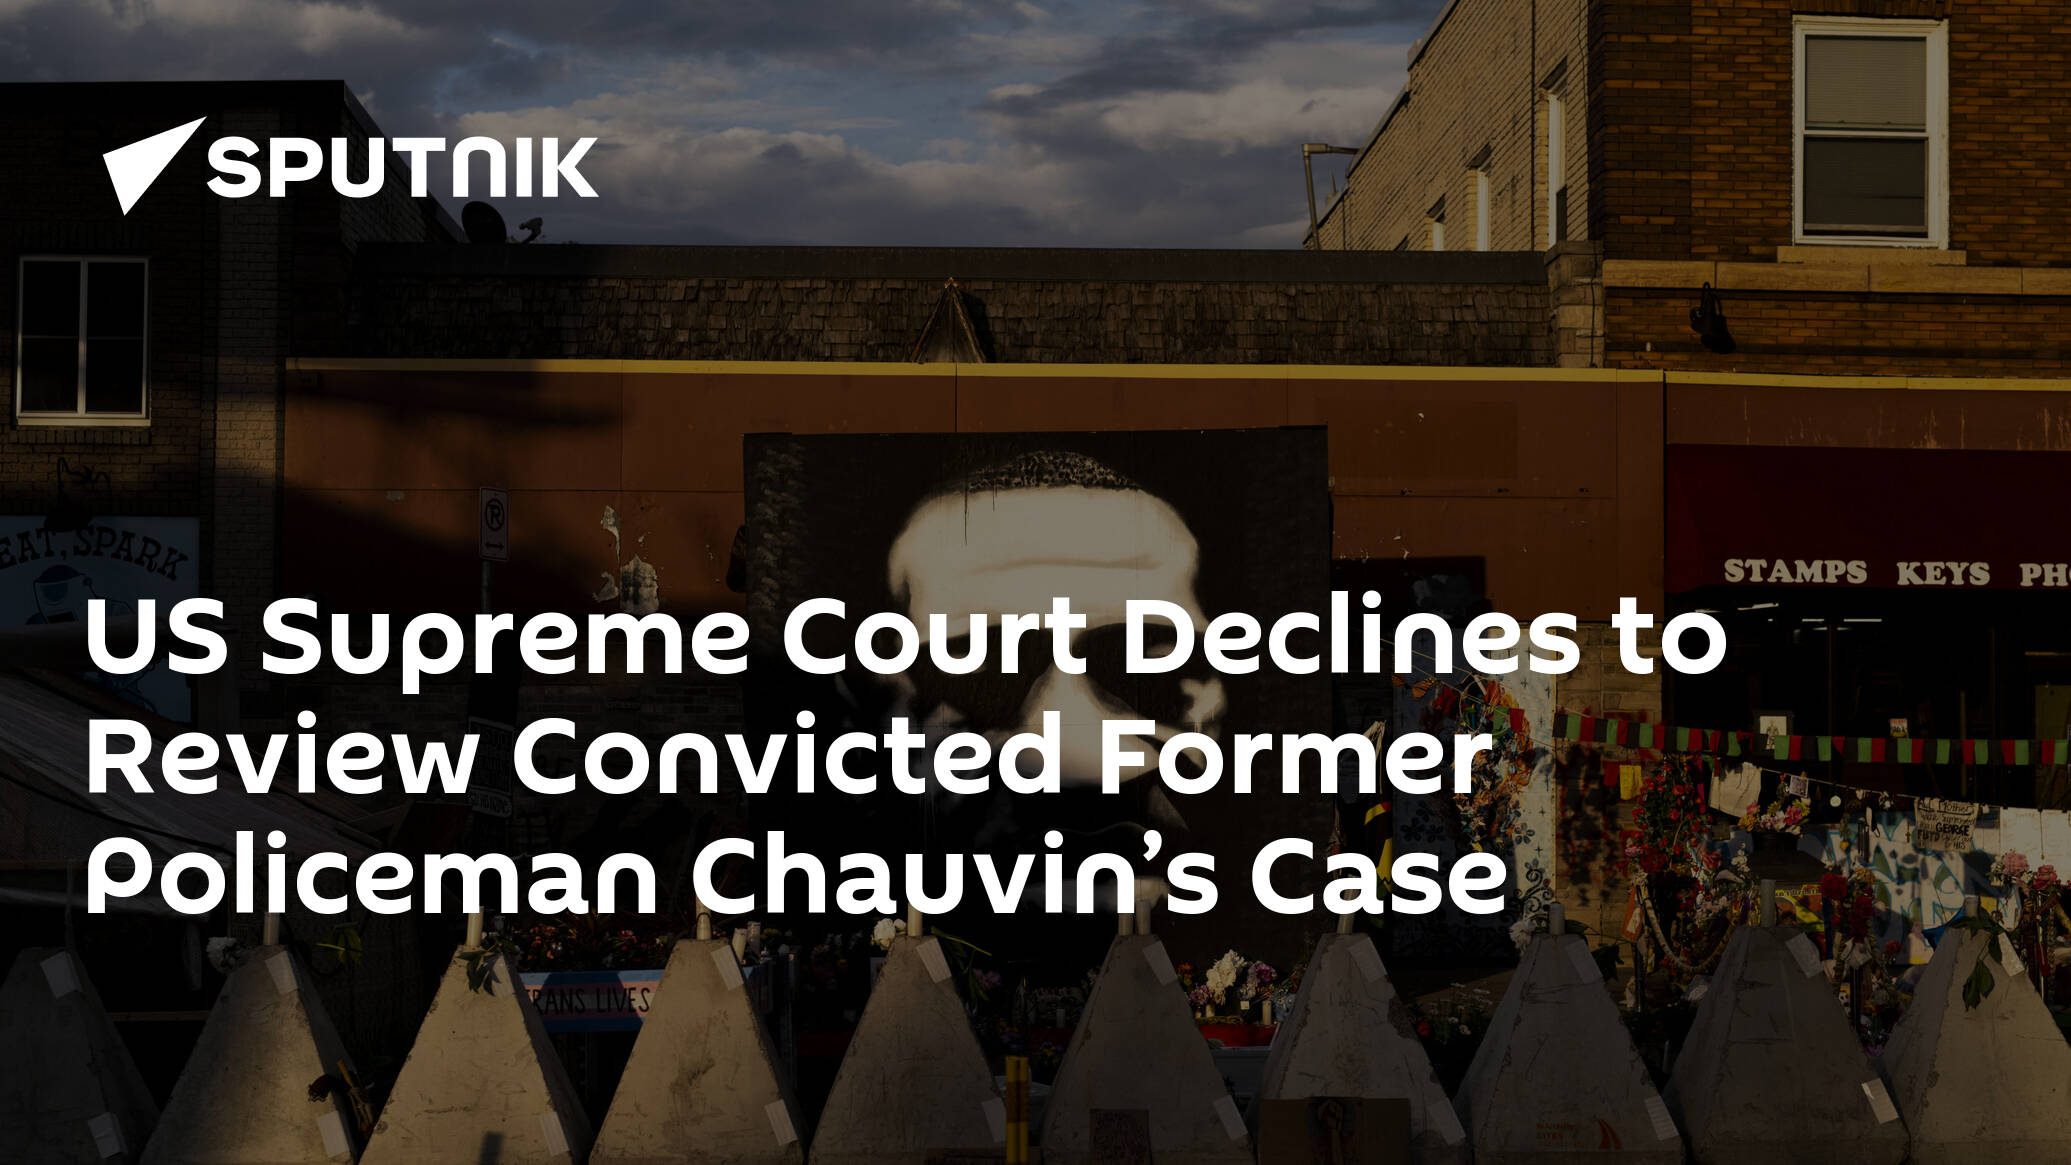 US Supreme Court Declines to Review Convicted Former Policeman Chauvin’s Case